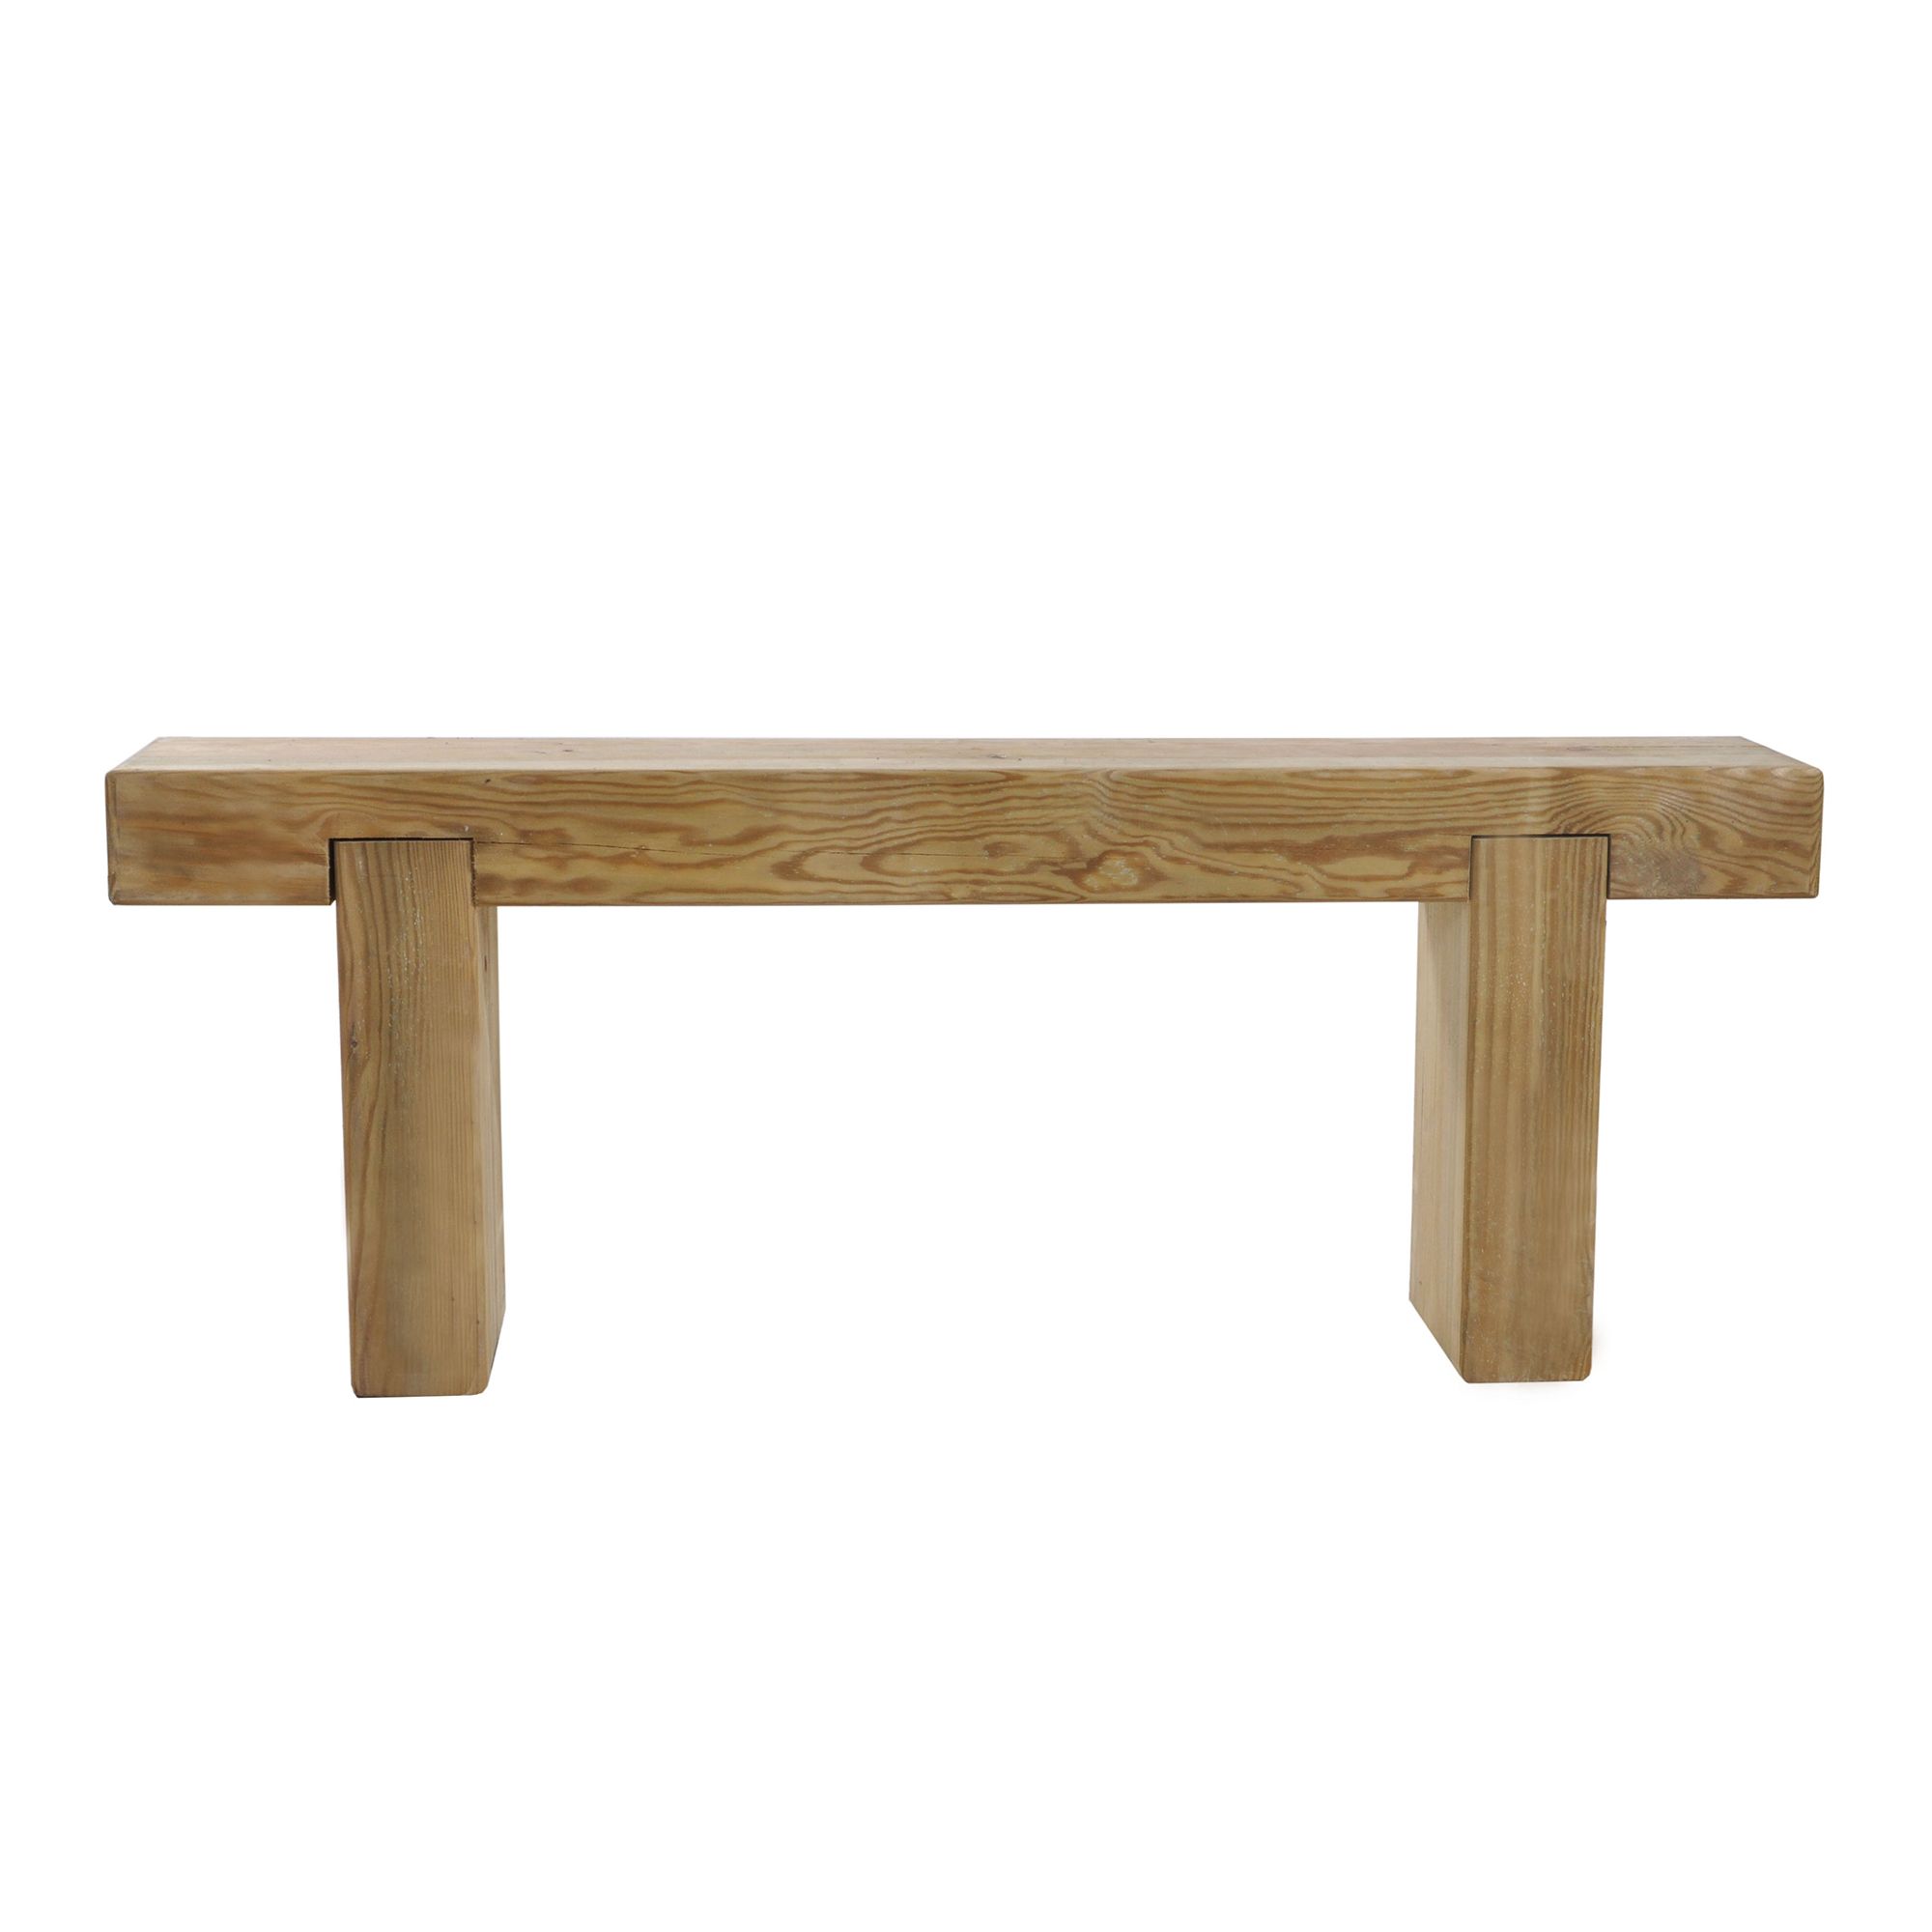 Forest Garden Sleeper Natural timber Wooden Non-foldable Bench 120cm(W) 44.7cm(H)